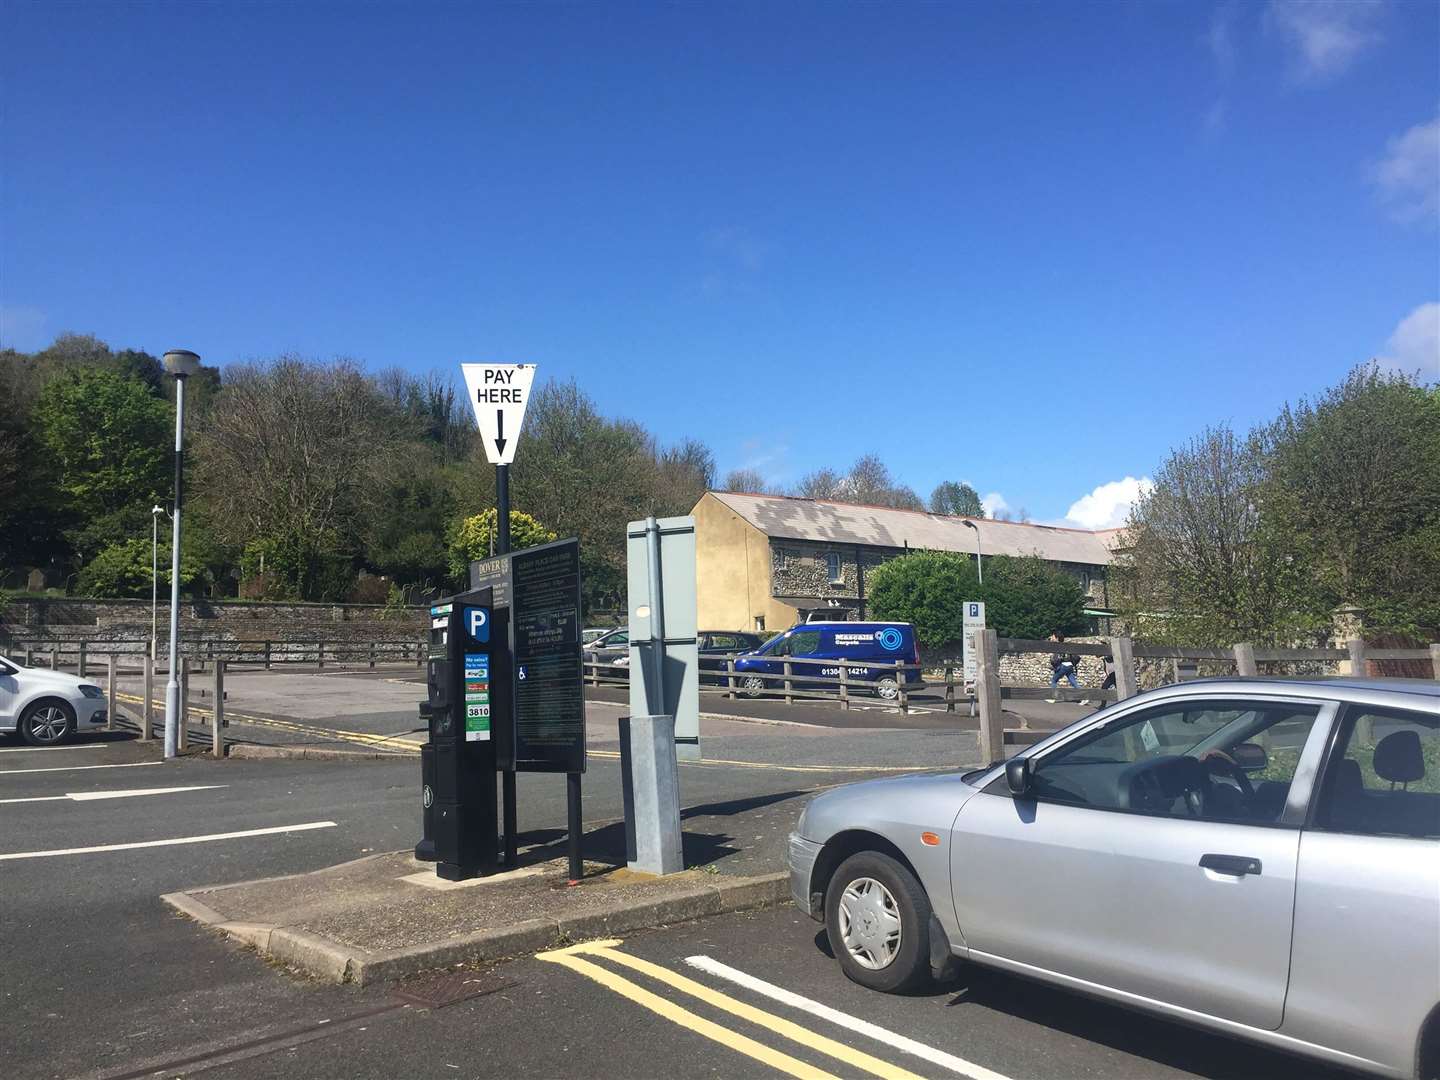 Car parks across the county use a variety of different payment machines